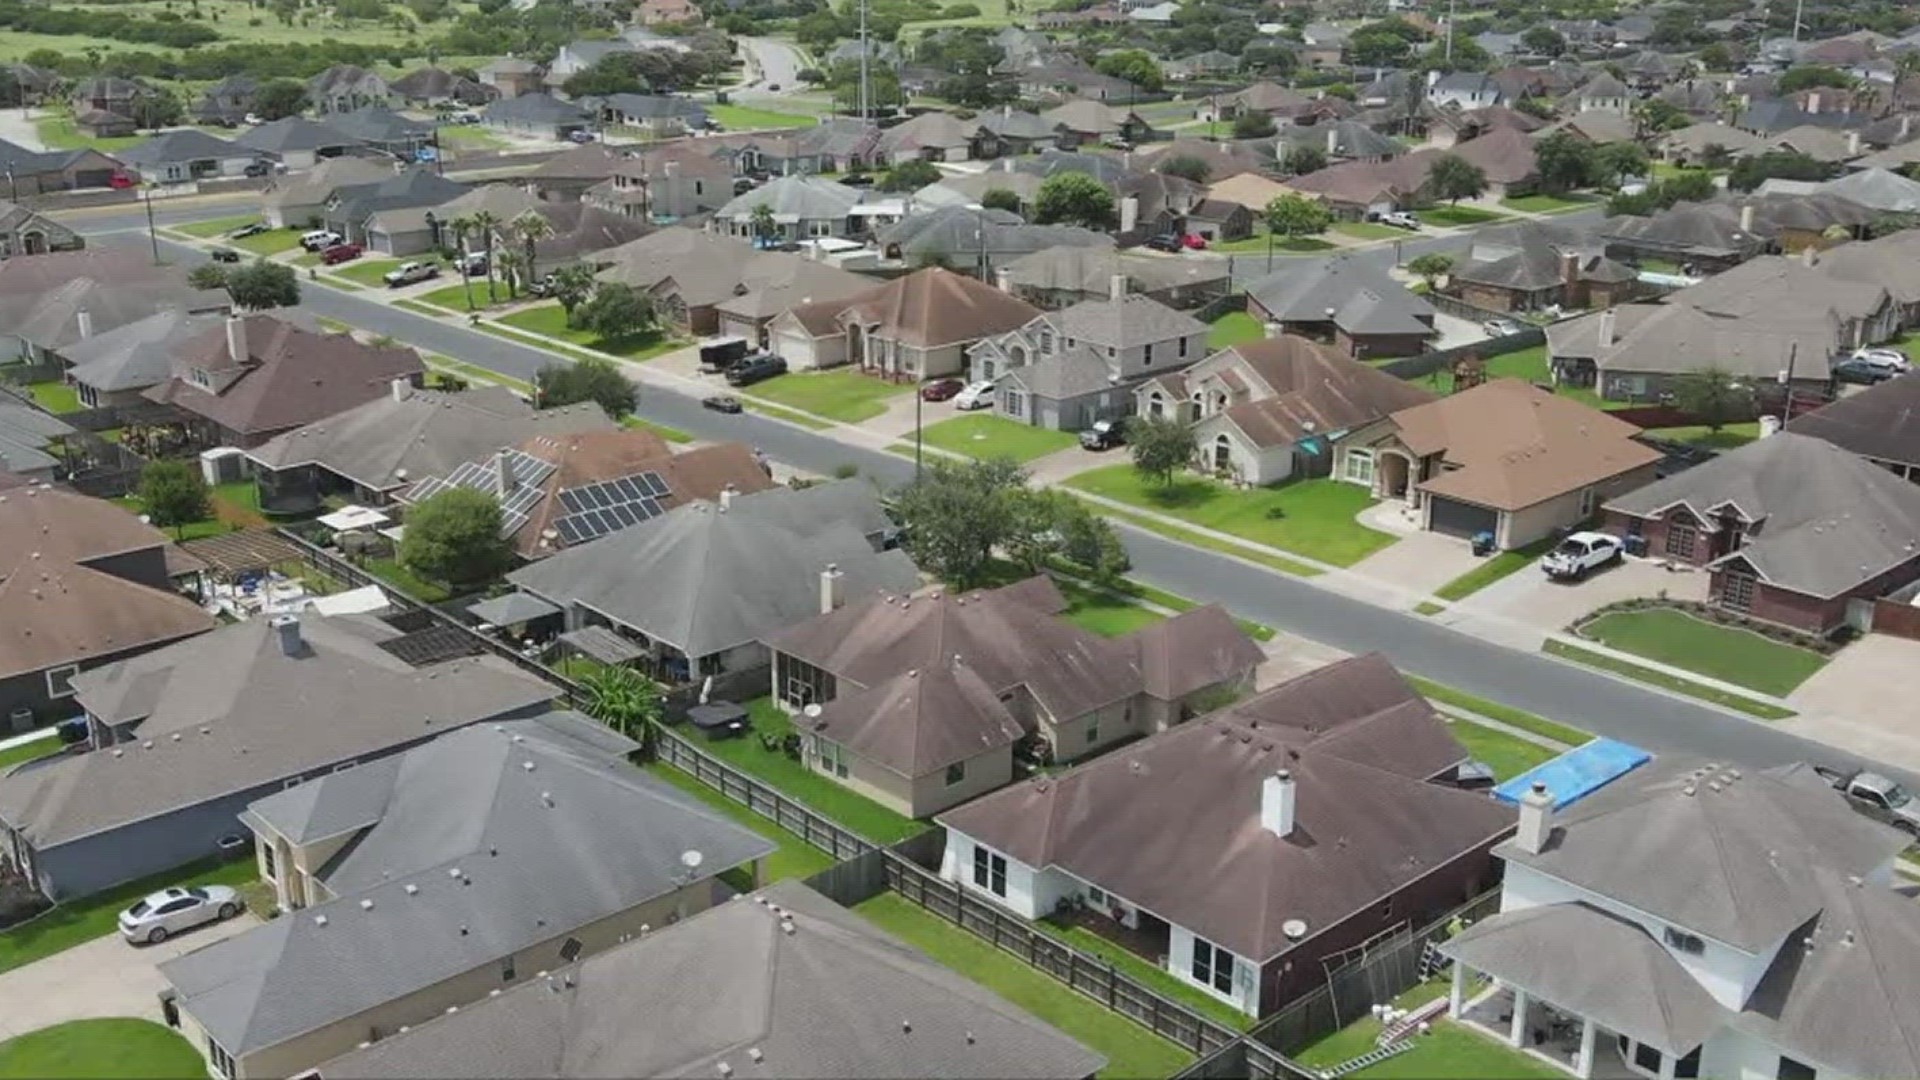 Corpus Christi realtor Christ Montalvo told 3NEWS that foreclosure rates have stayed relatively low for the past decade.